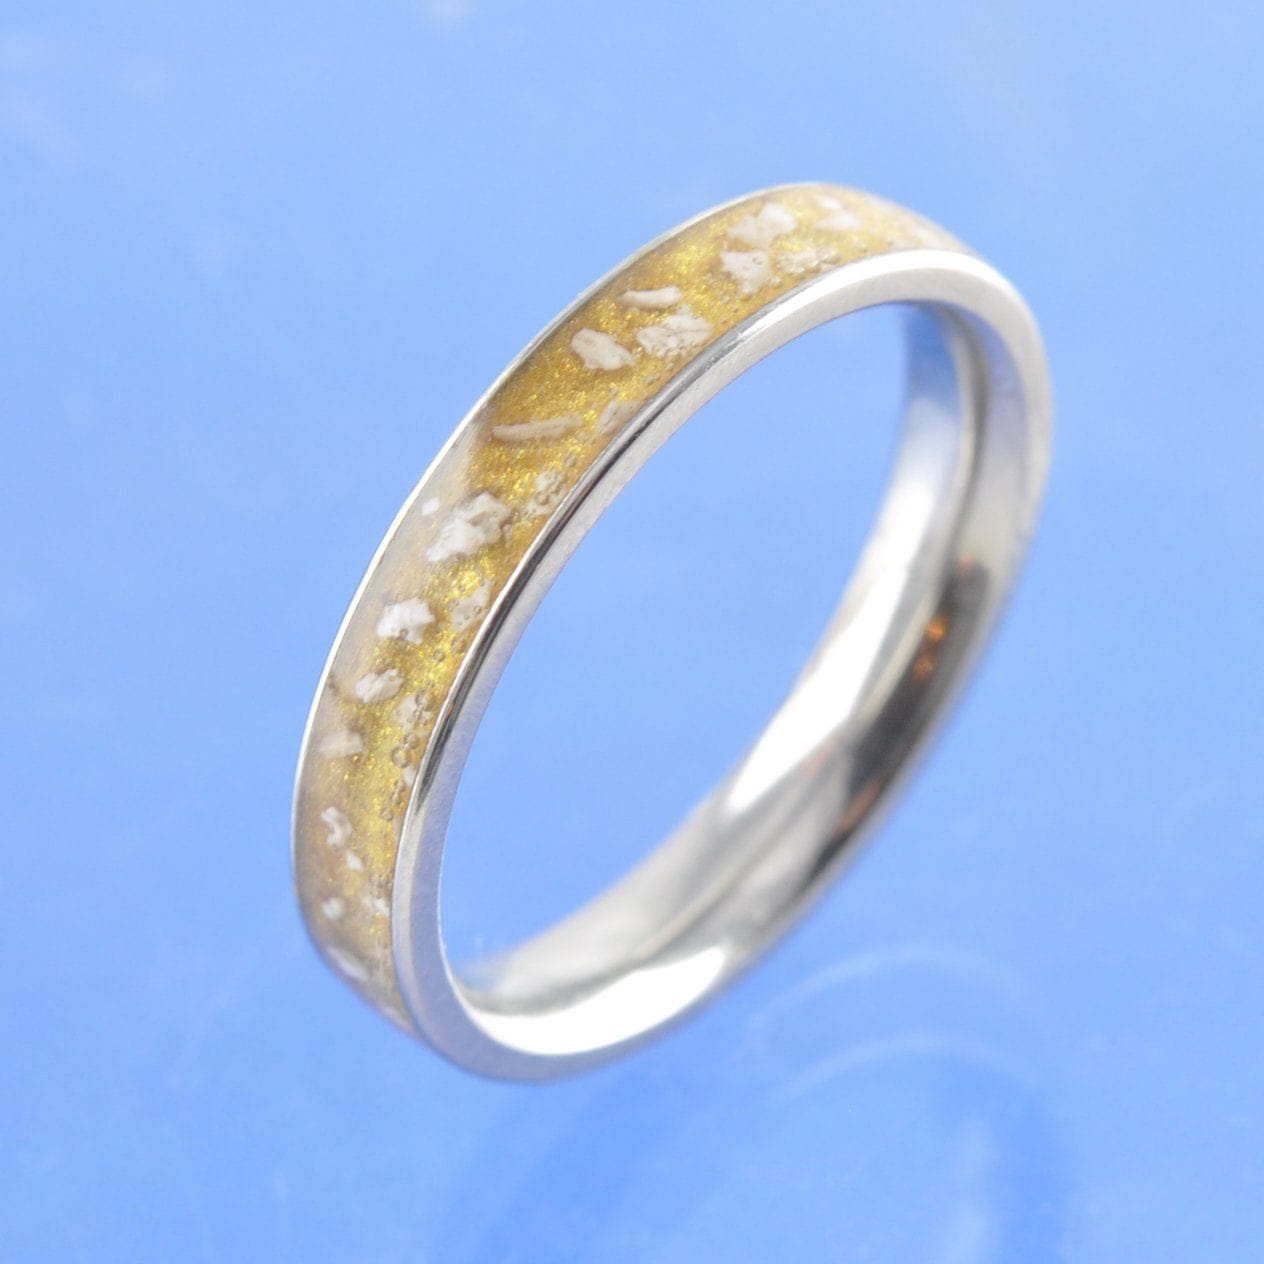 Cremation Ash Ring - Titanium - 4mm Channel set Ring by Chris Parry Jewellery